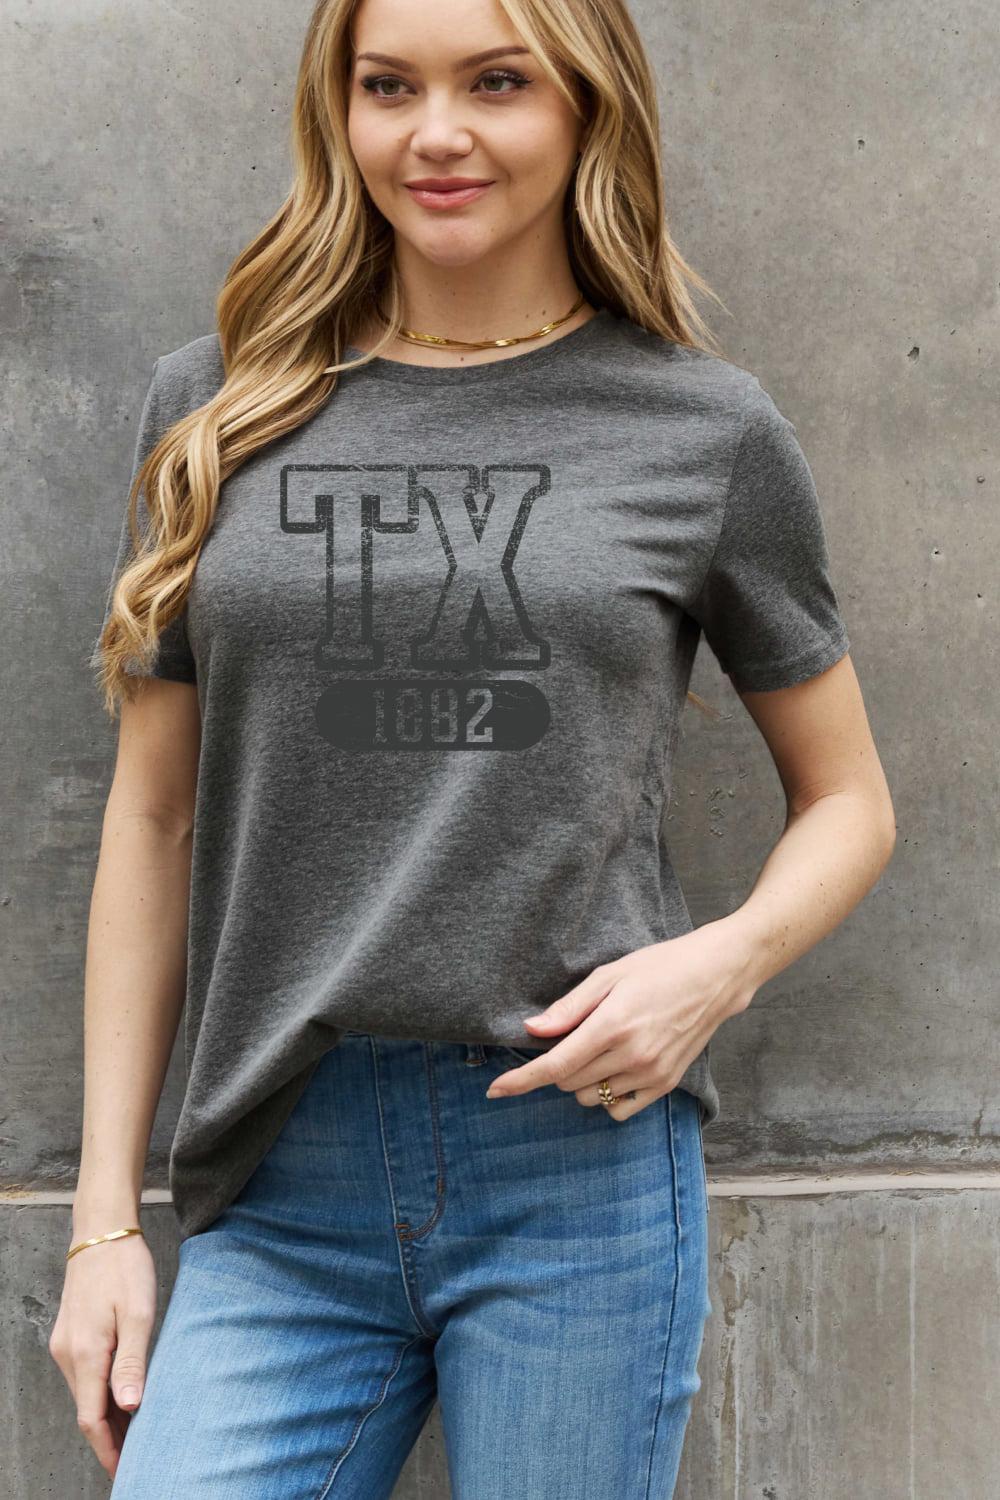 Simply Love Full Size TX 1882 Graphic Cotton Tee BLUE ZONE PLANET